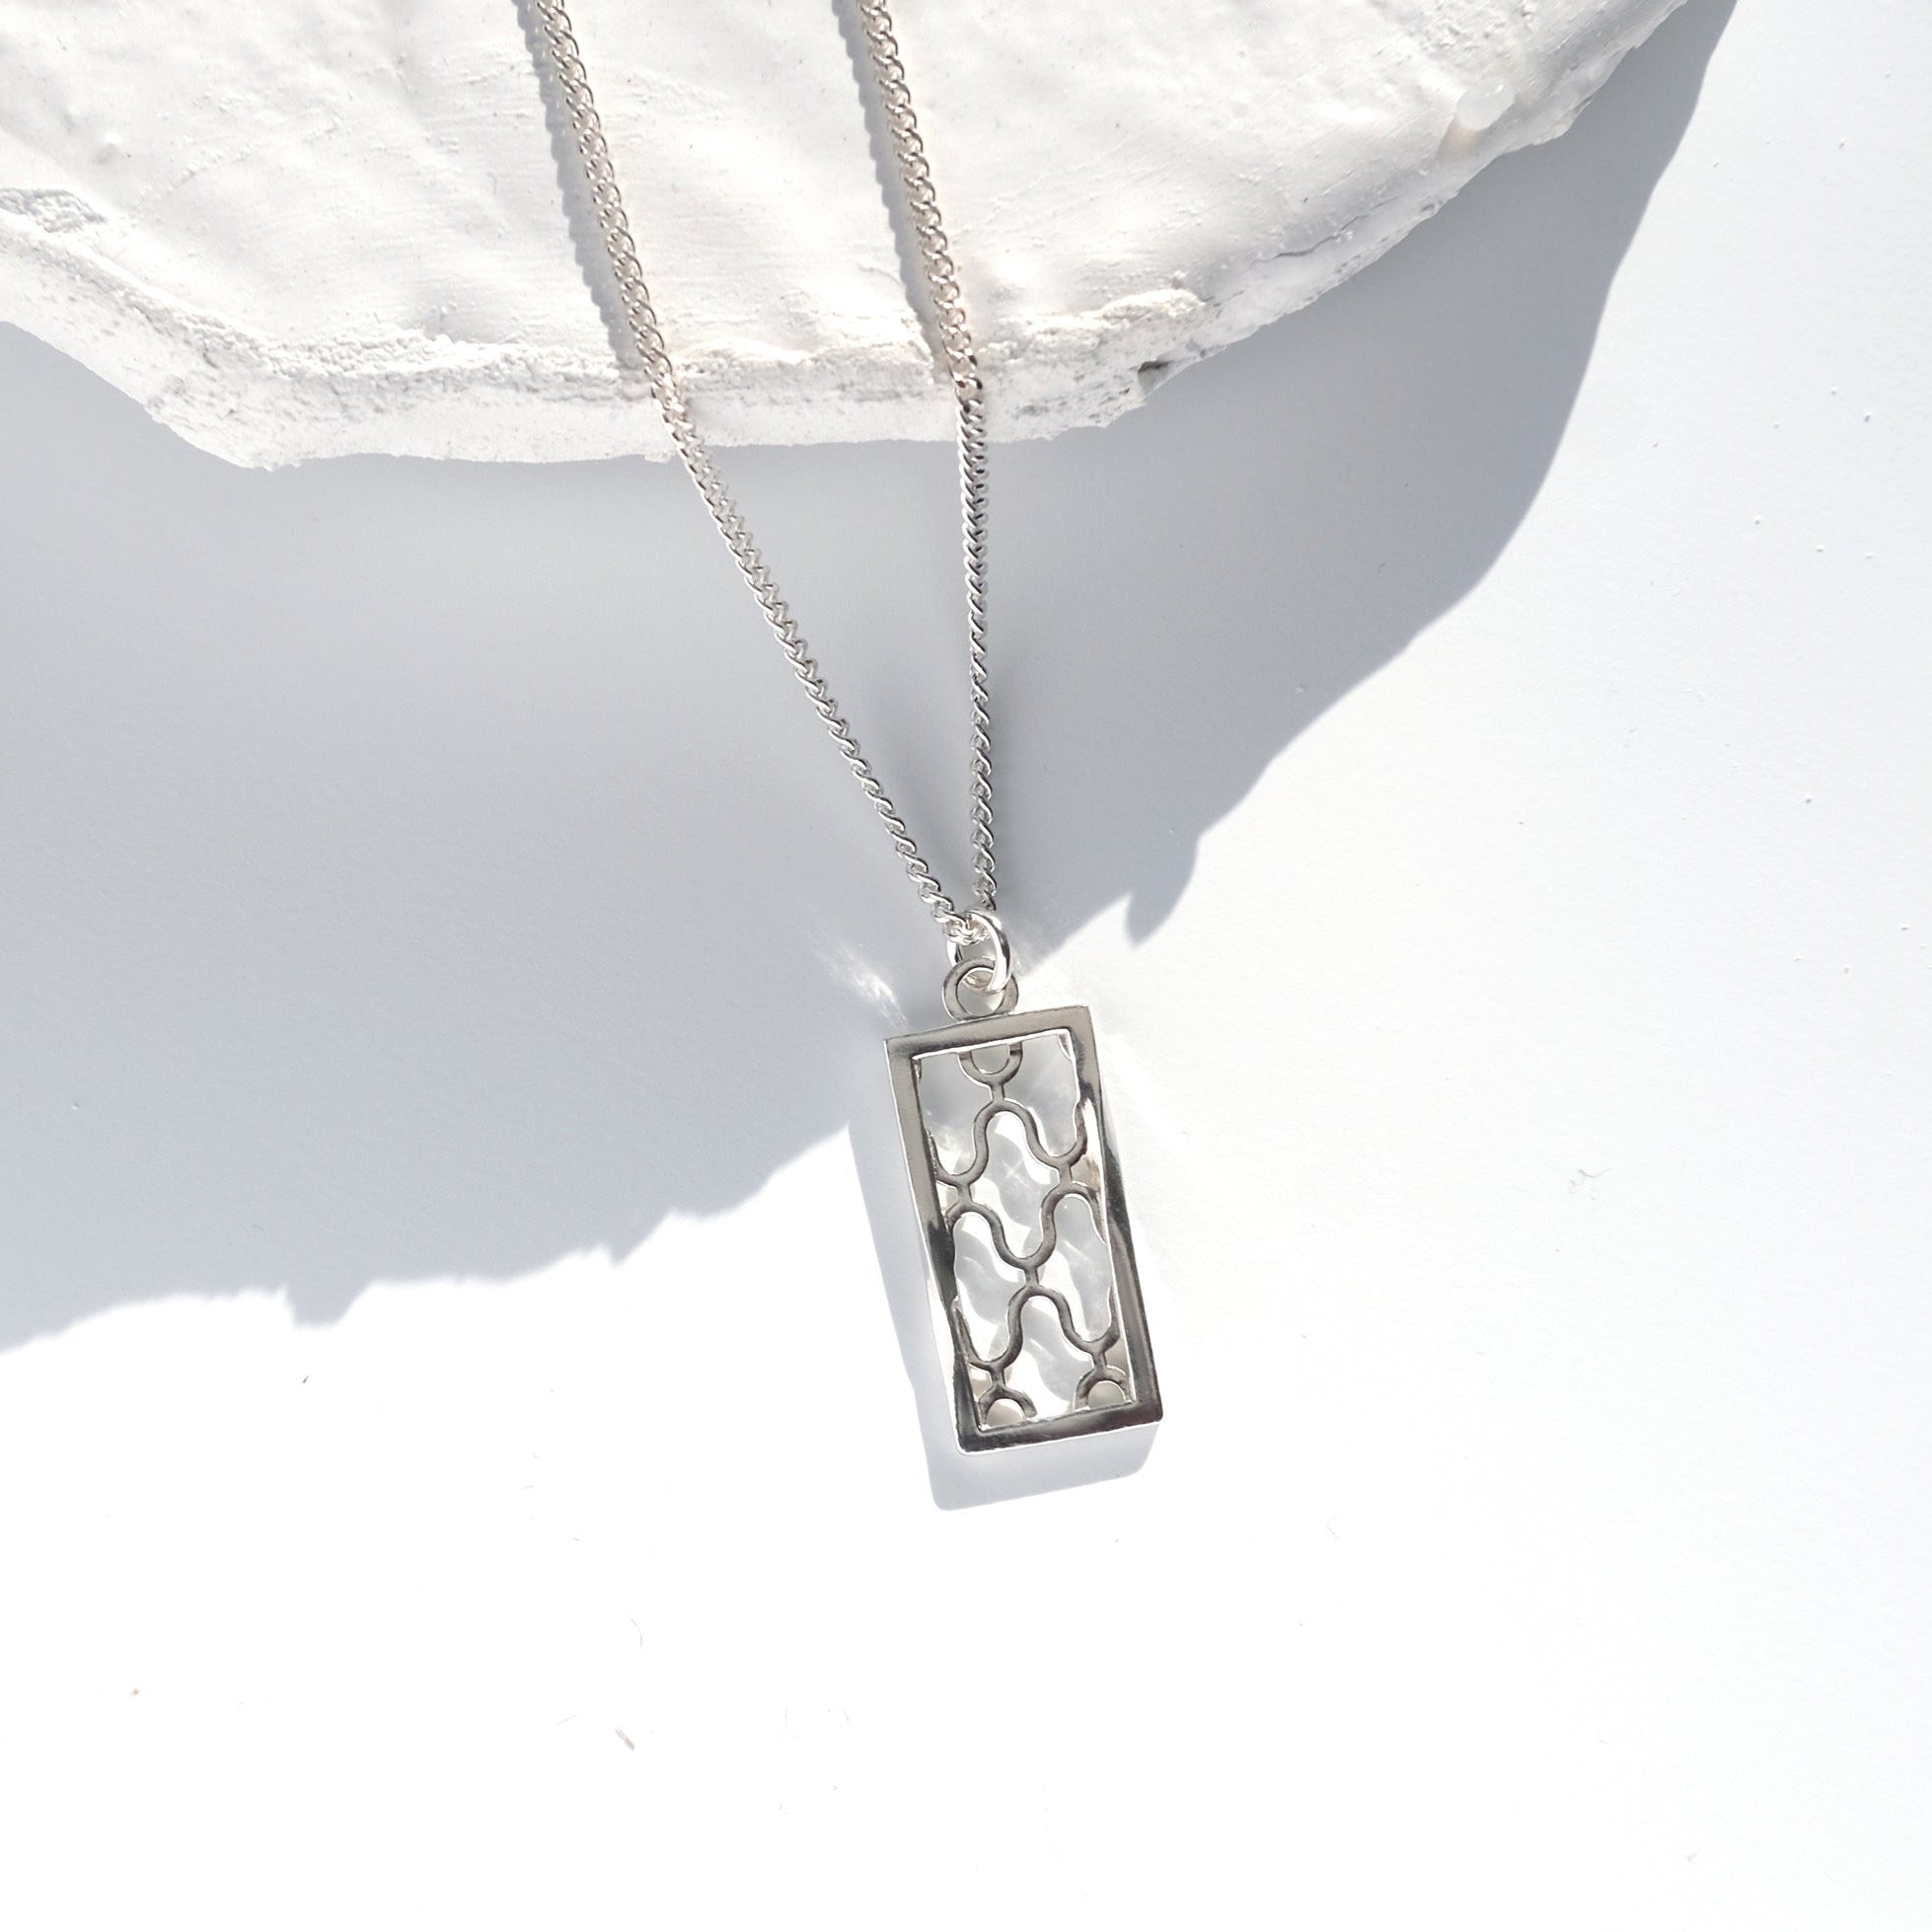 Long Ripple Sentinel Necklace